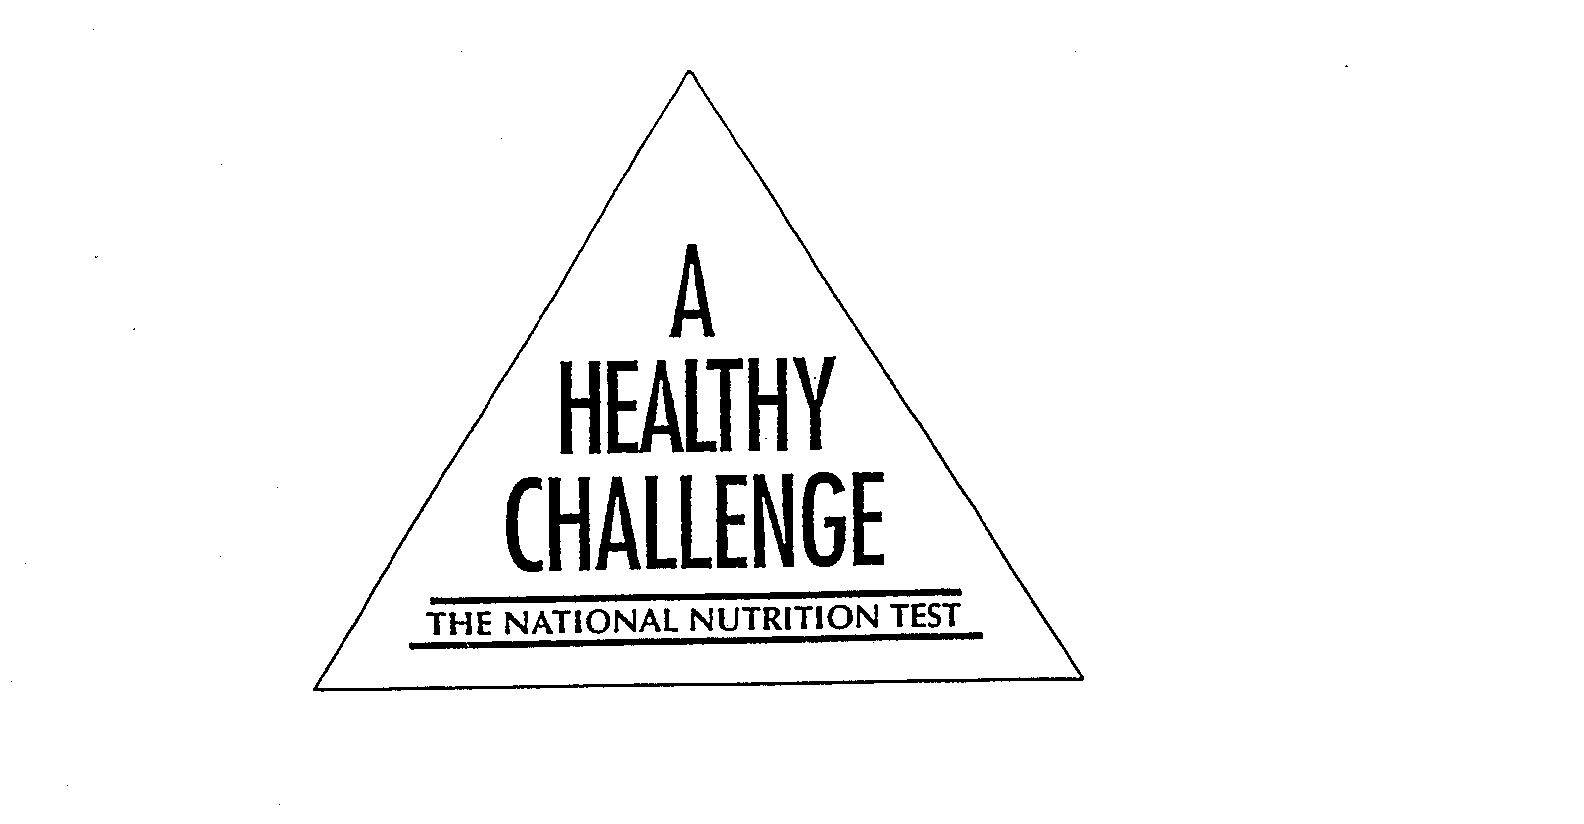  A HEALTHY CHALLENGE THE NATIONAL NUTRITION TEST